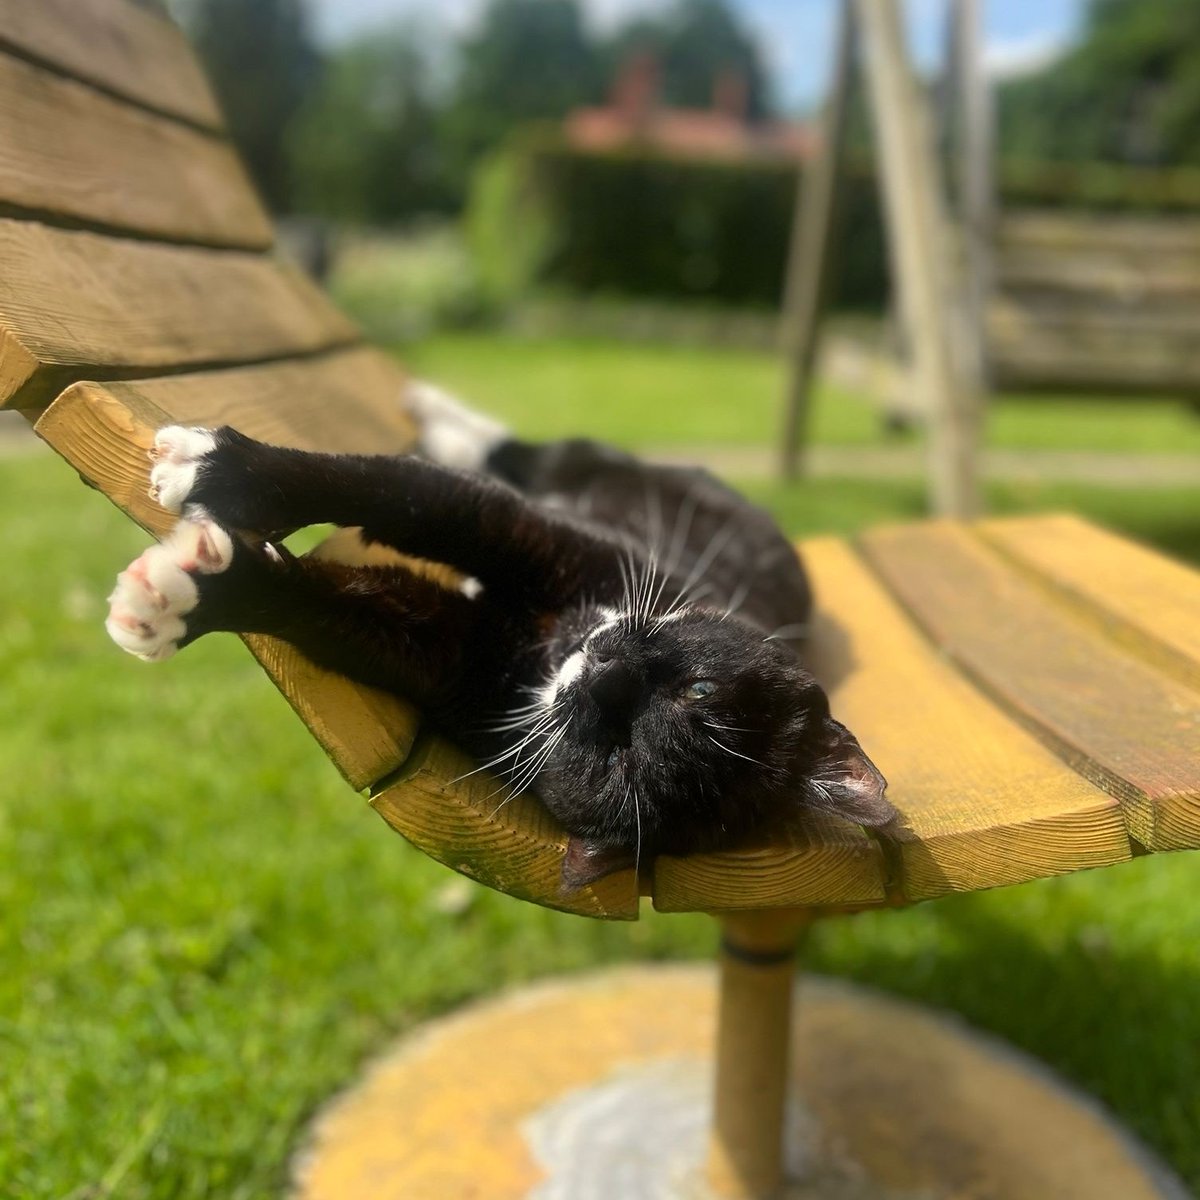 While the rest of the team is busy, Clumber cat, Mr Tibbs, has other ideas. Happy Friday! #ClumberPark